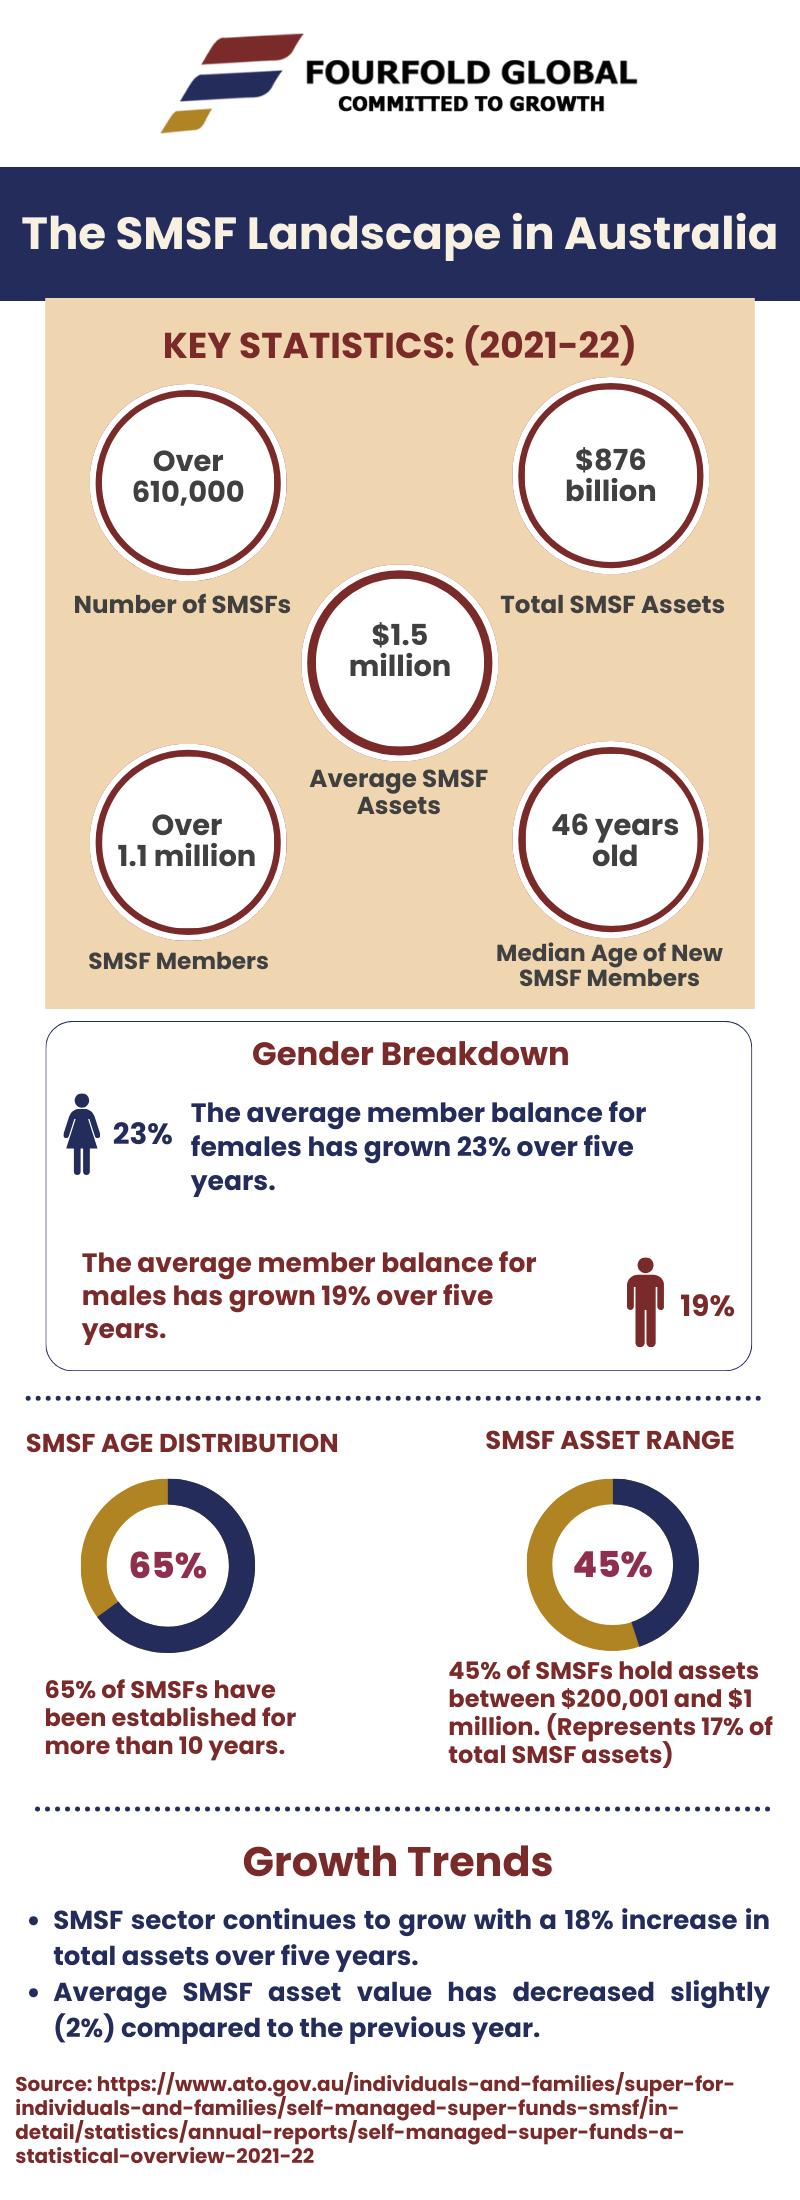 Infographic on Self-Managed Superannuation Funds (SMSFs) in Australia (2021-22)